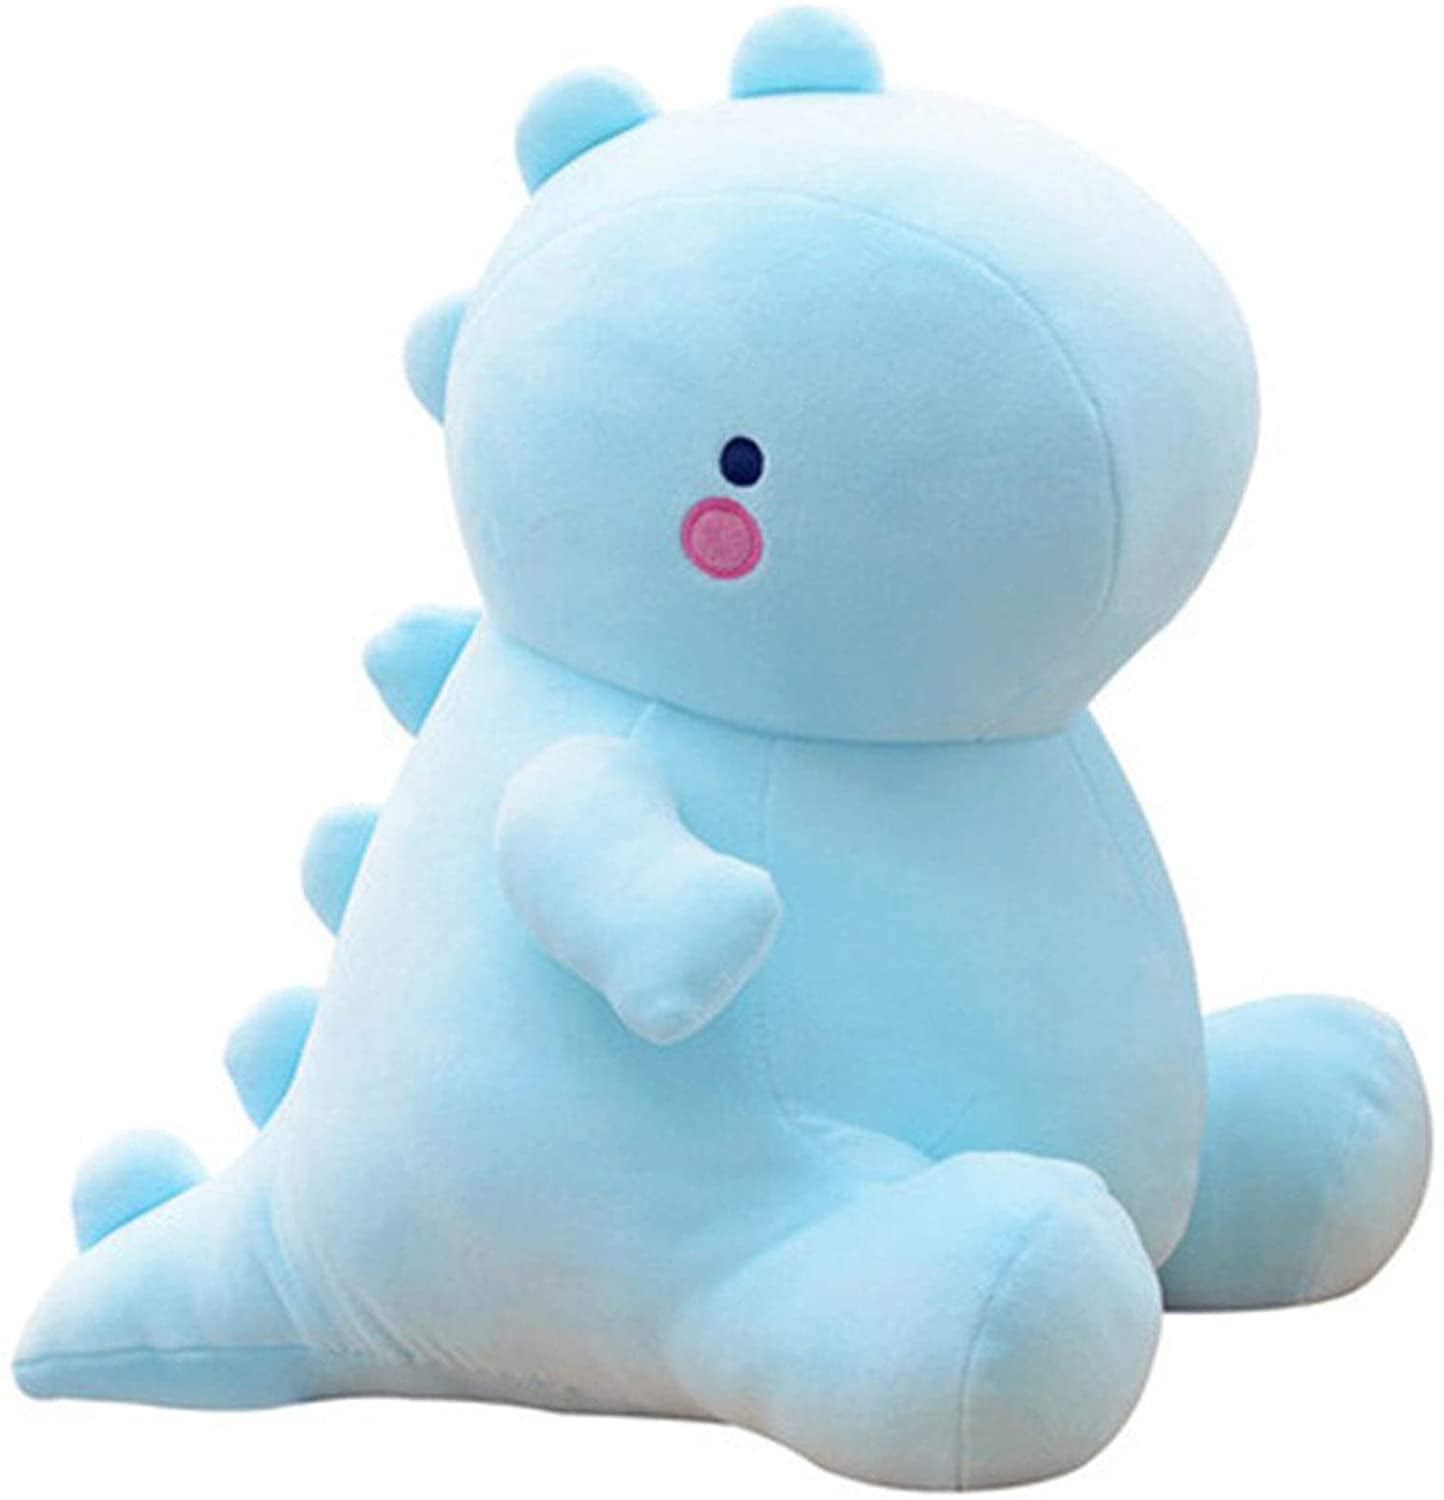 Size : 80cm Perfect Present for Kids Babies Color : White ZMDZA Cute Stuffed Animal Plush Toy Toddlers Adorable Soft Dinosaur Toy Plushies and Gifts 